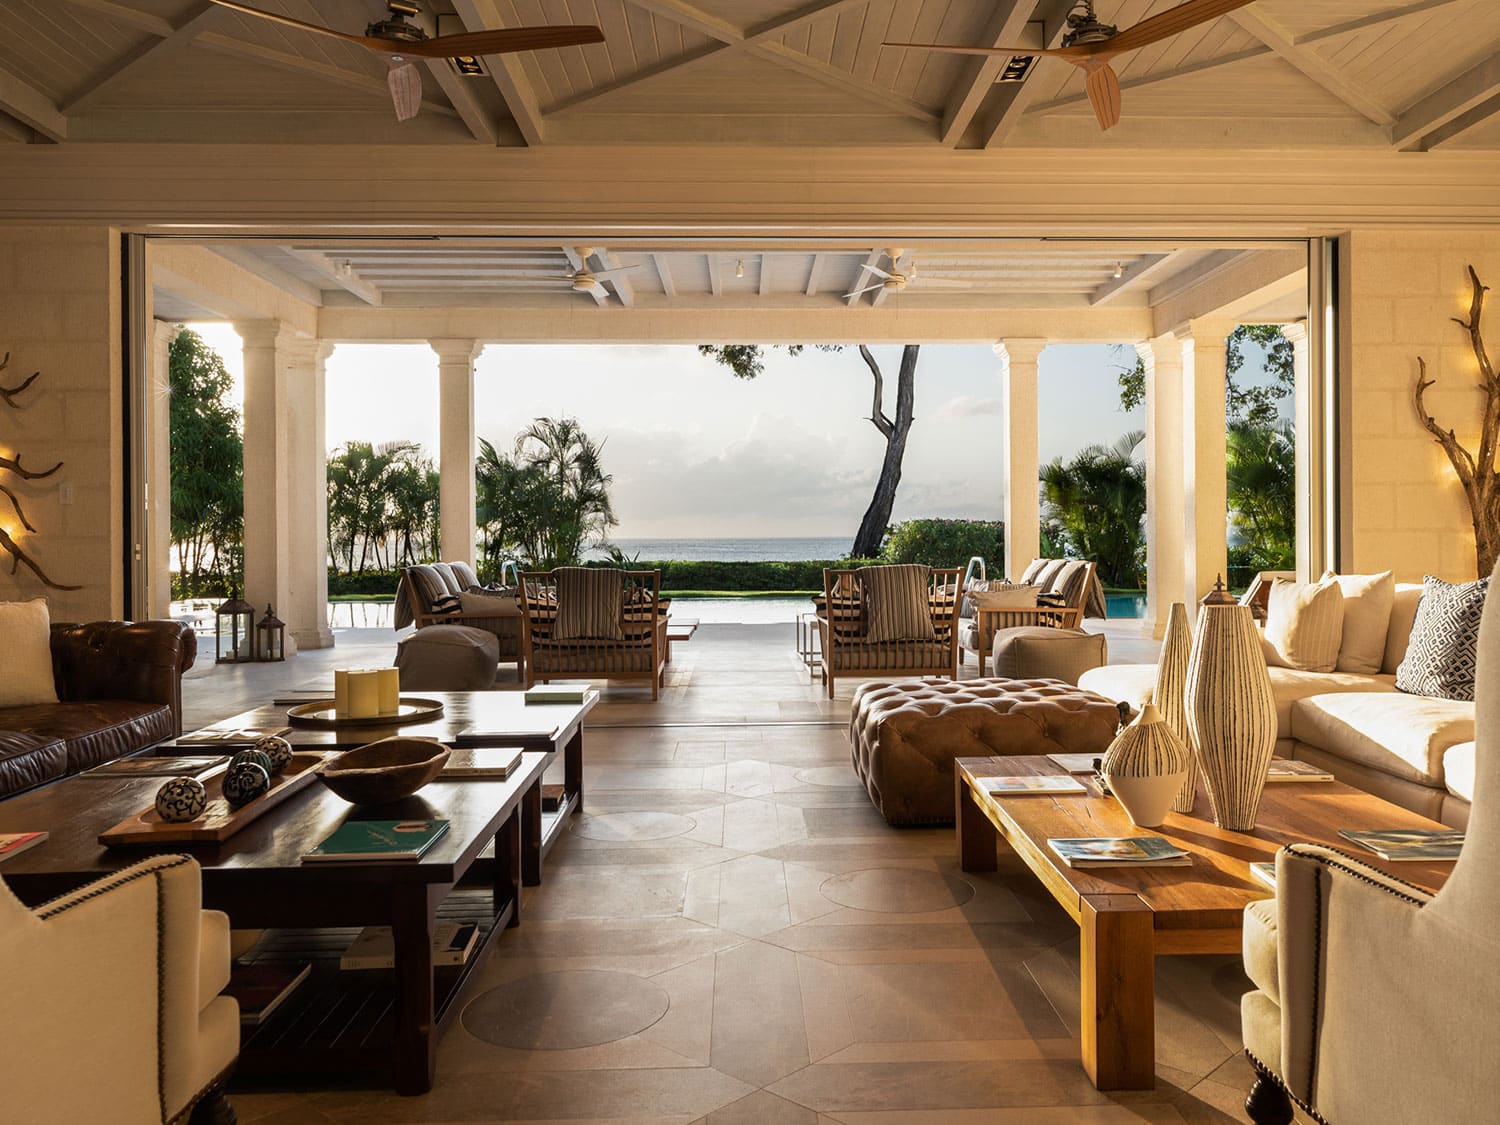 The indoor/outdoor living space at the Villa Tamarindo rental property in the Caribbean island of Barbados.